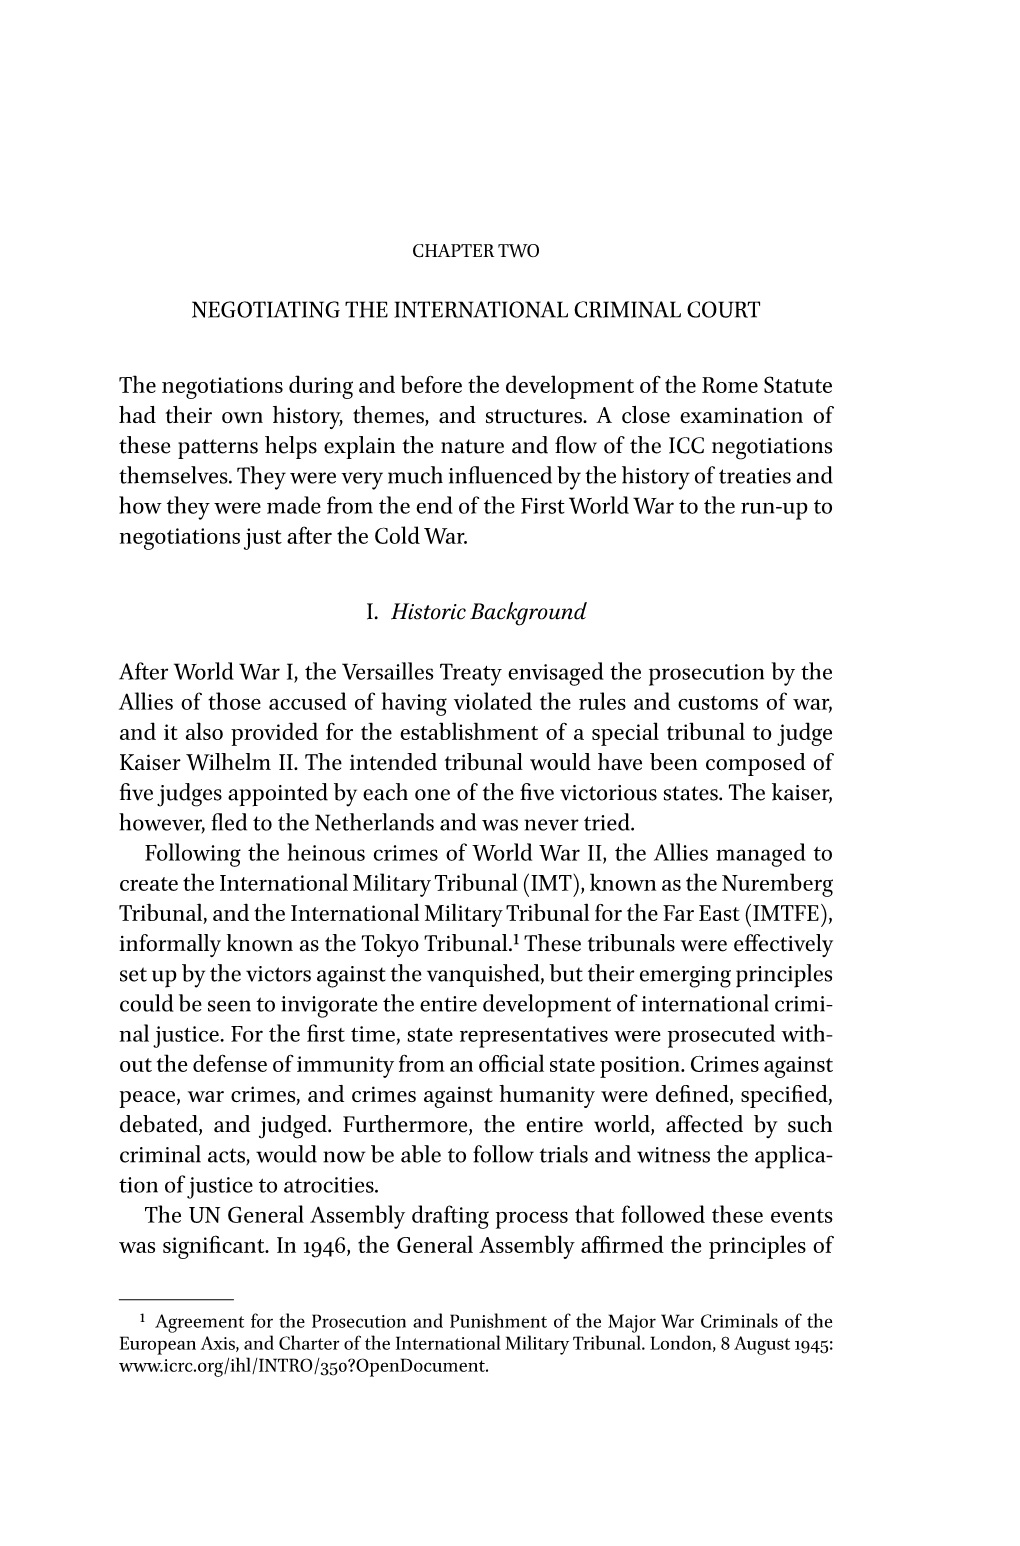 NEGOTIATING the INTERNATIONAL CRIMINAL COURT the Negotiations During and Before the Development of the Rome Statute Had Their Ow